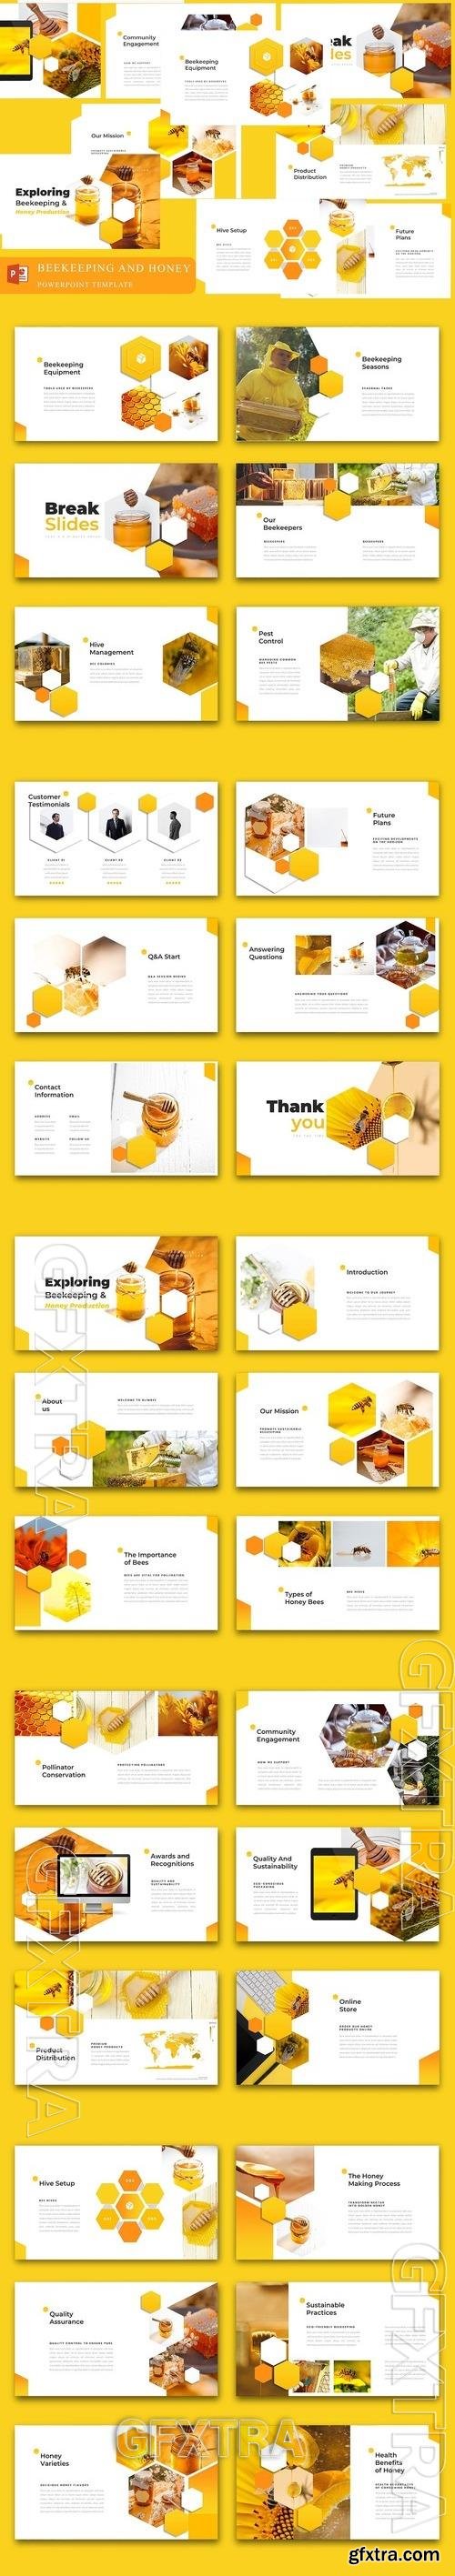 Beekeeping and honey production PowerPoint SHXQE9B